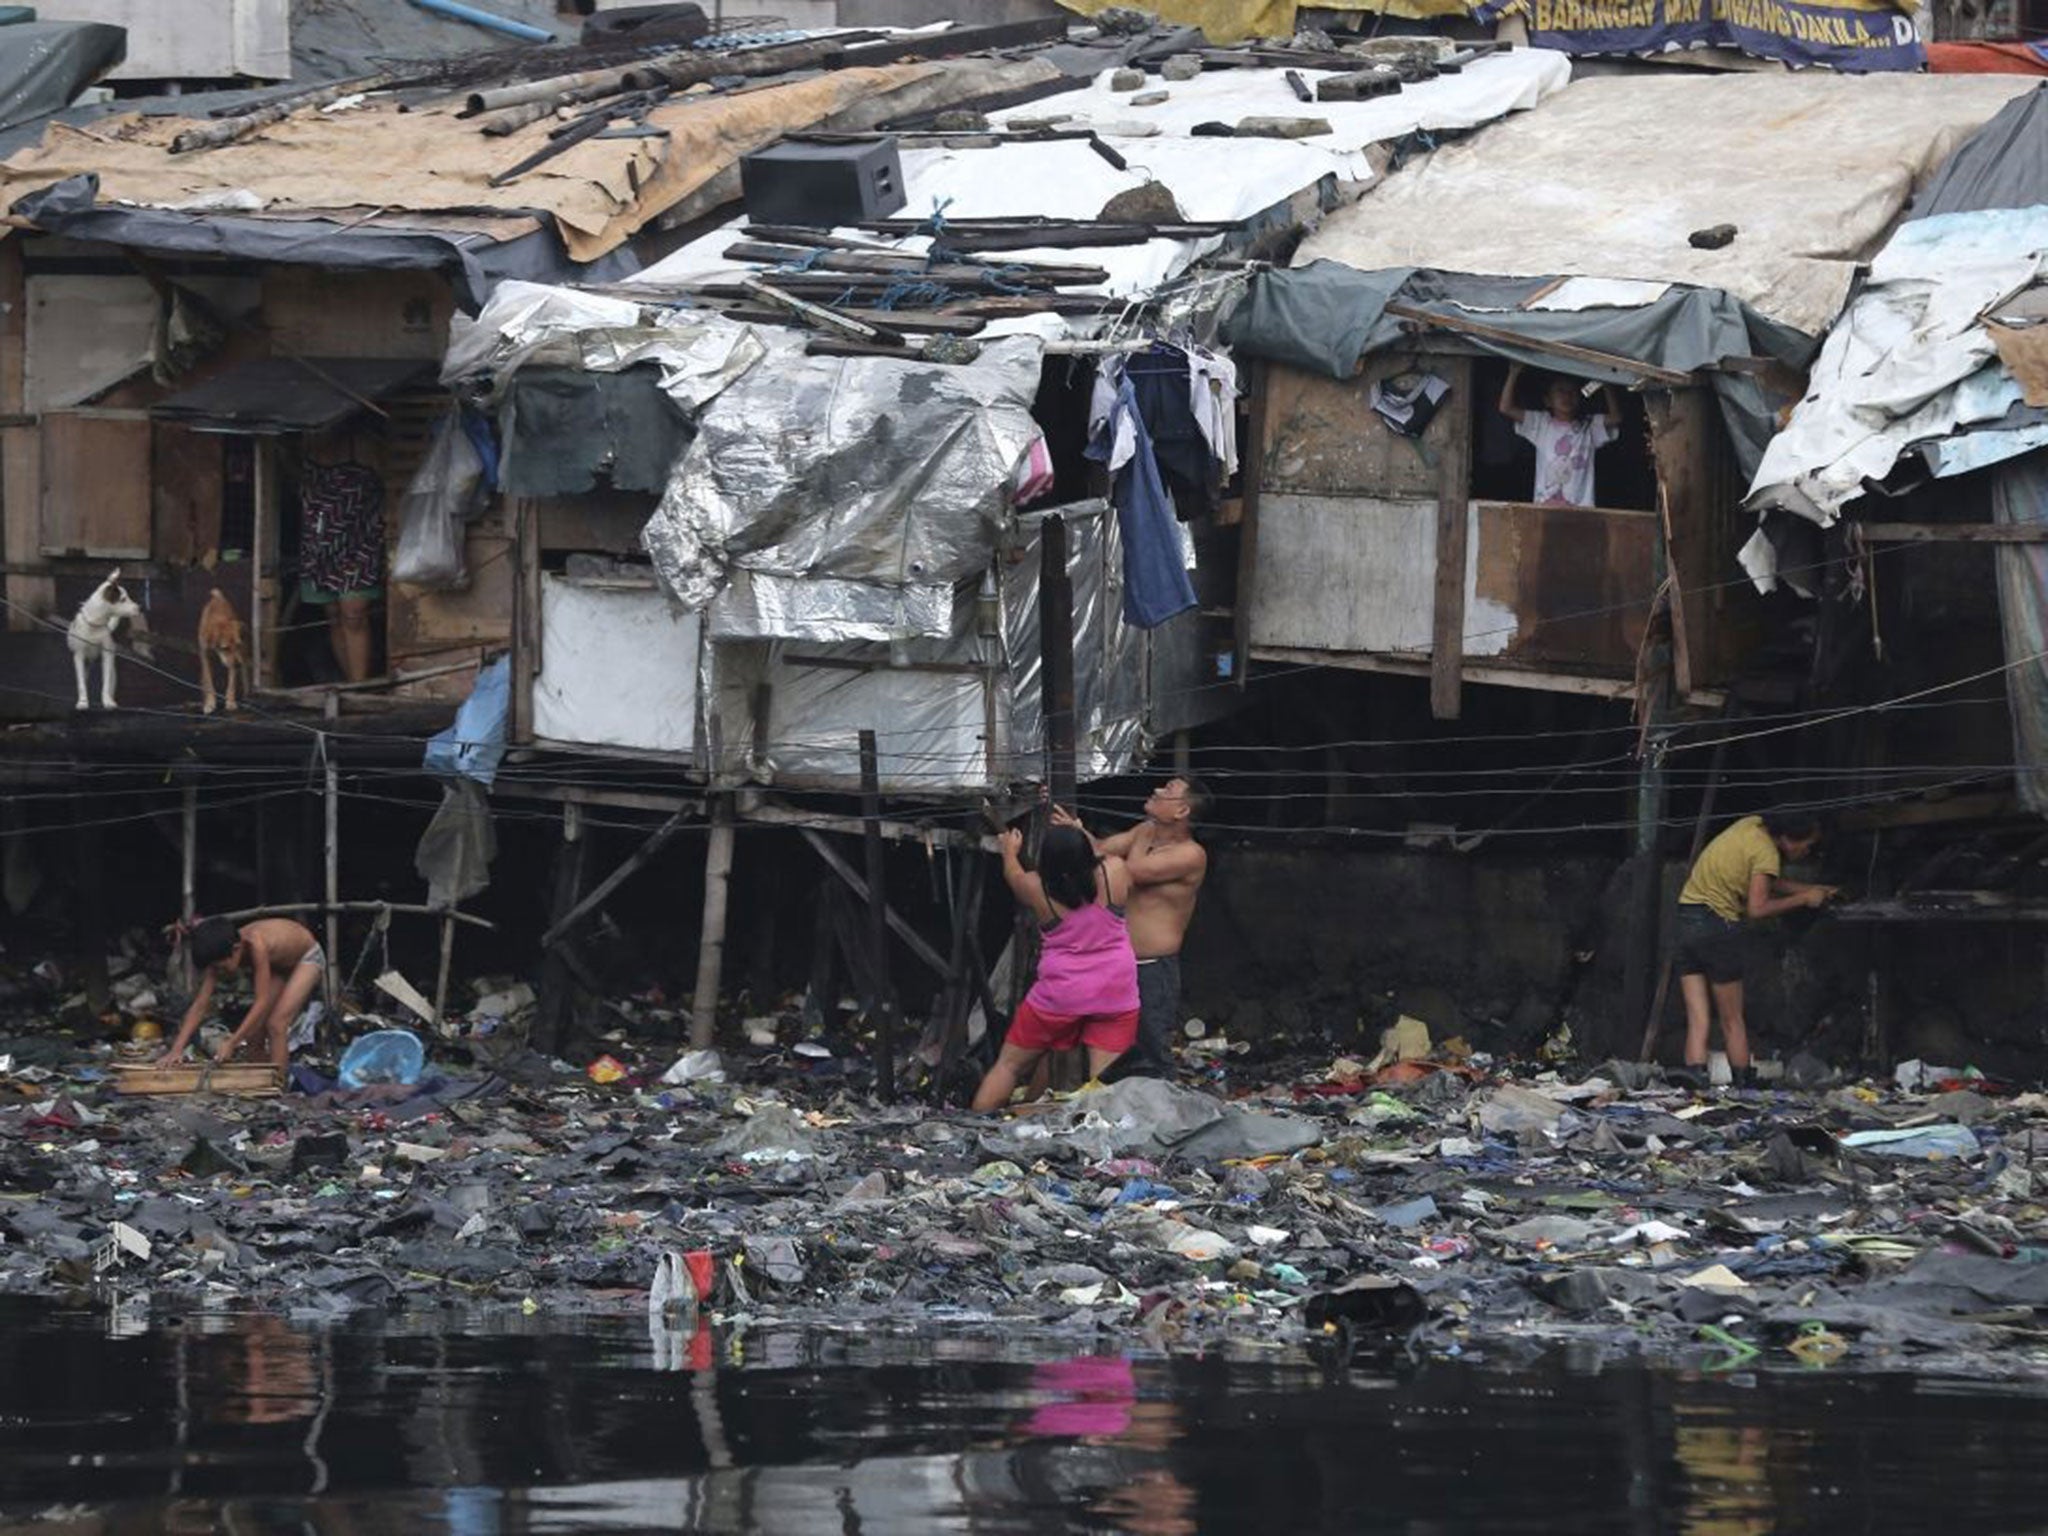 Residents strengthen their homes built on stilts as they brace for incoming Typhoon Rammasun, beside Manila's bay, Philippines on Tuesday, July 15, 2014.